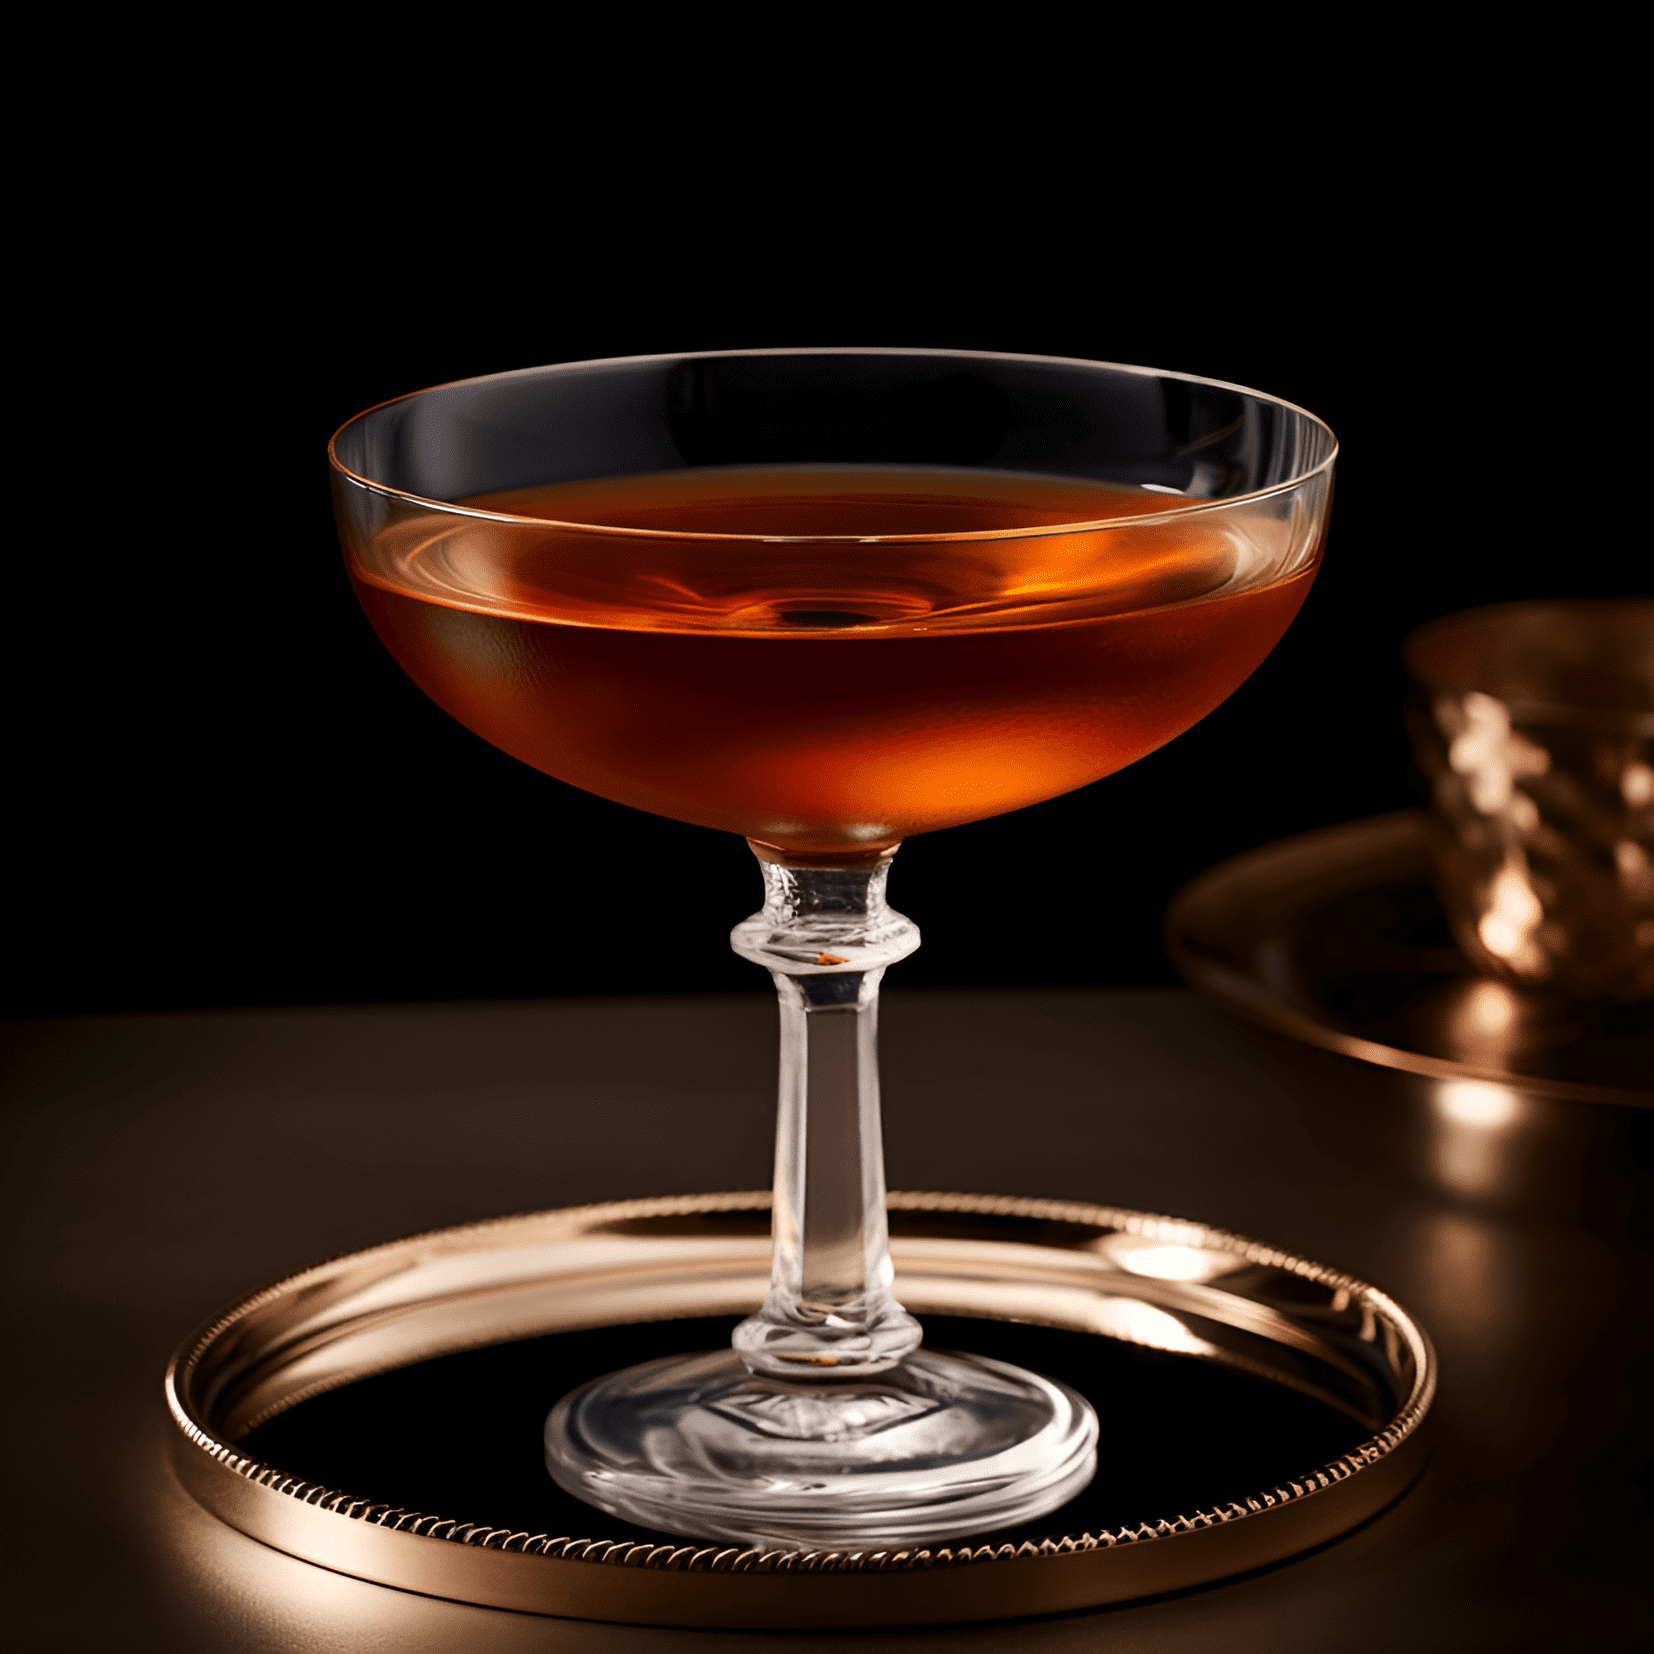 Stinger Cocktail Recipe - The Stinger has a smooth, velvety texture with a perfect balance of sweetness and warmth. The cognac provides a rich, fruity base, while the crème de menthe adds a cool, refreshing minty flavor. The result is a delightful, sophisticated cocktail that is both strong and easy to sip.